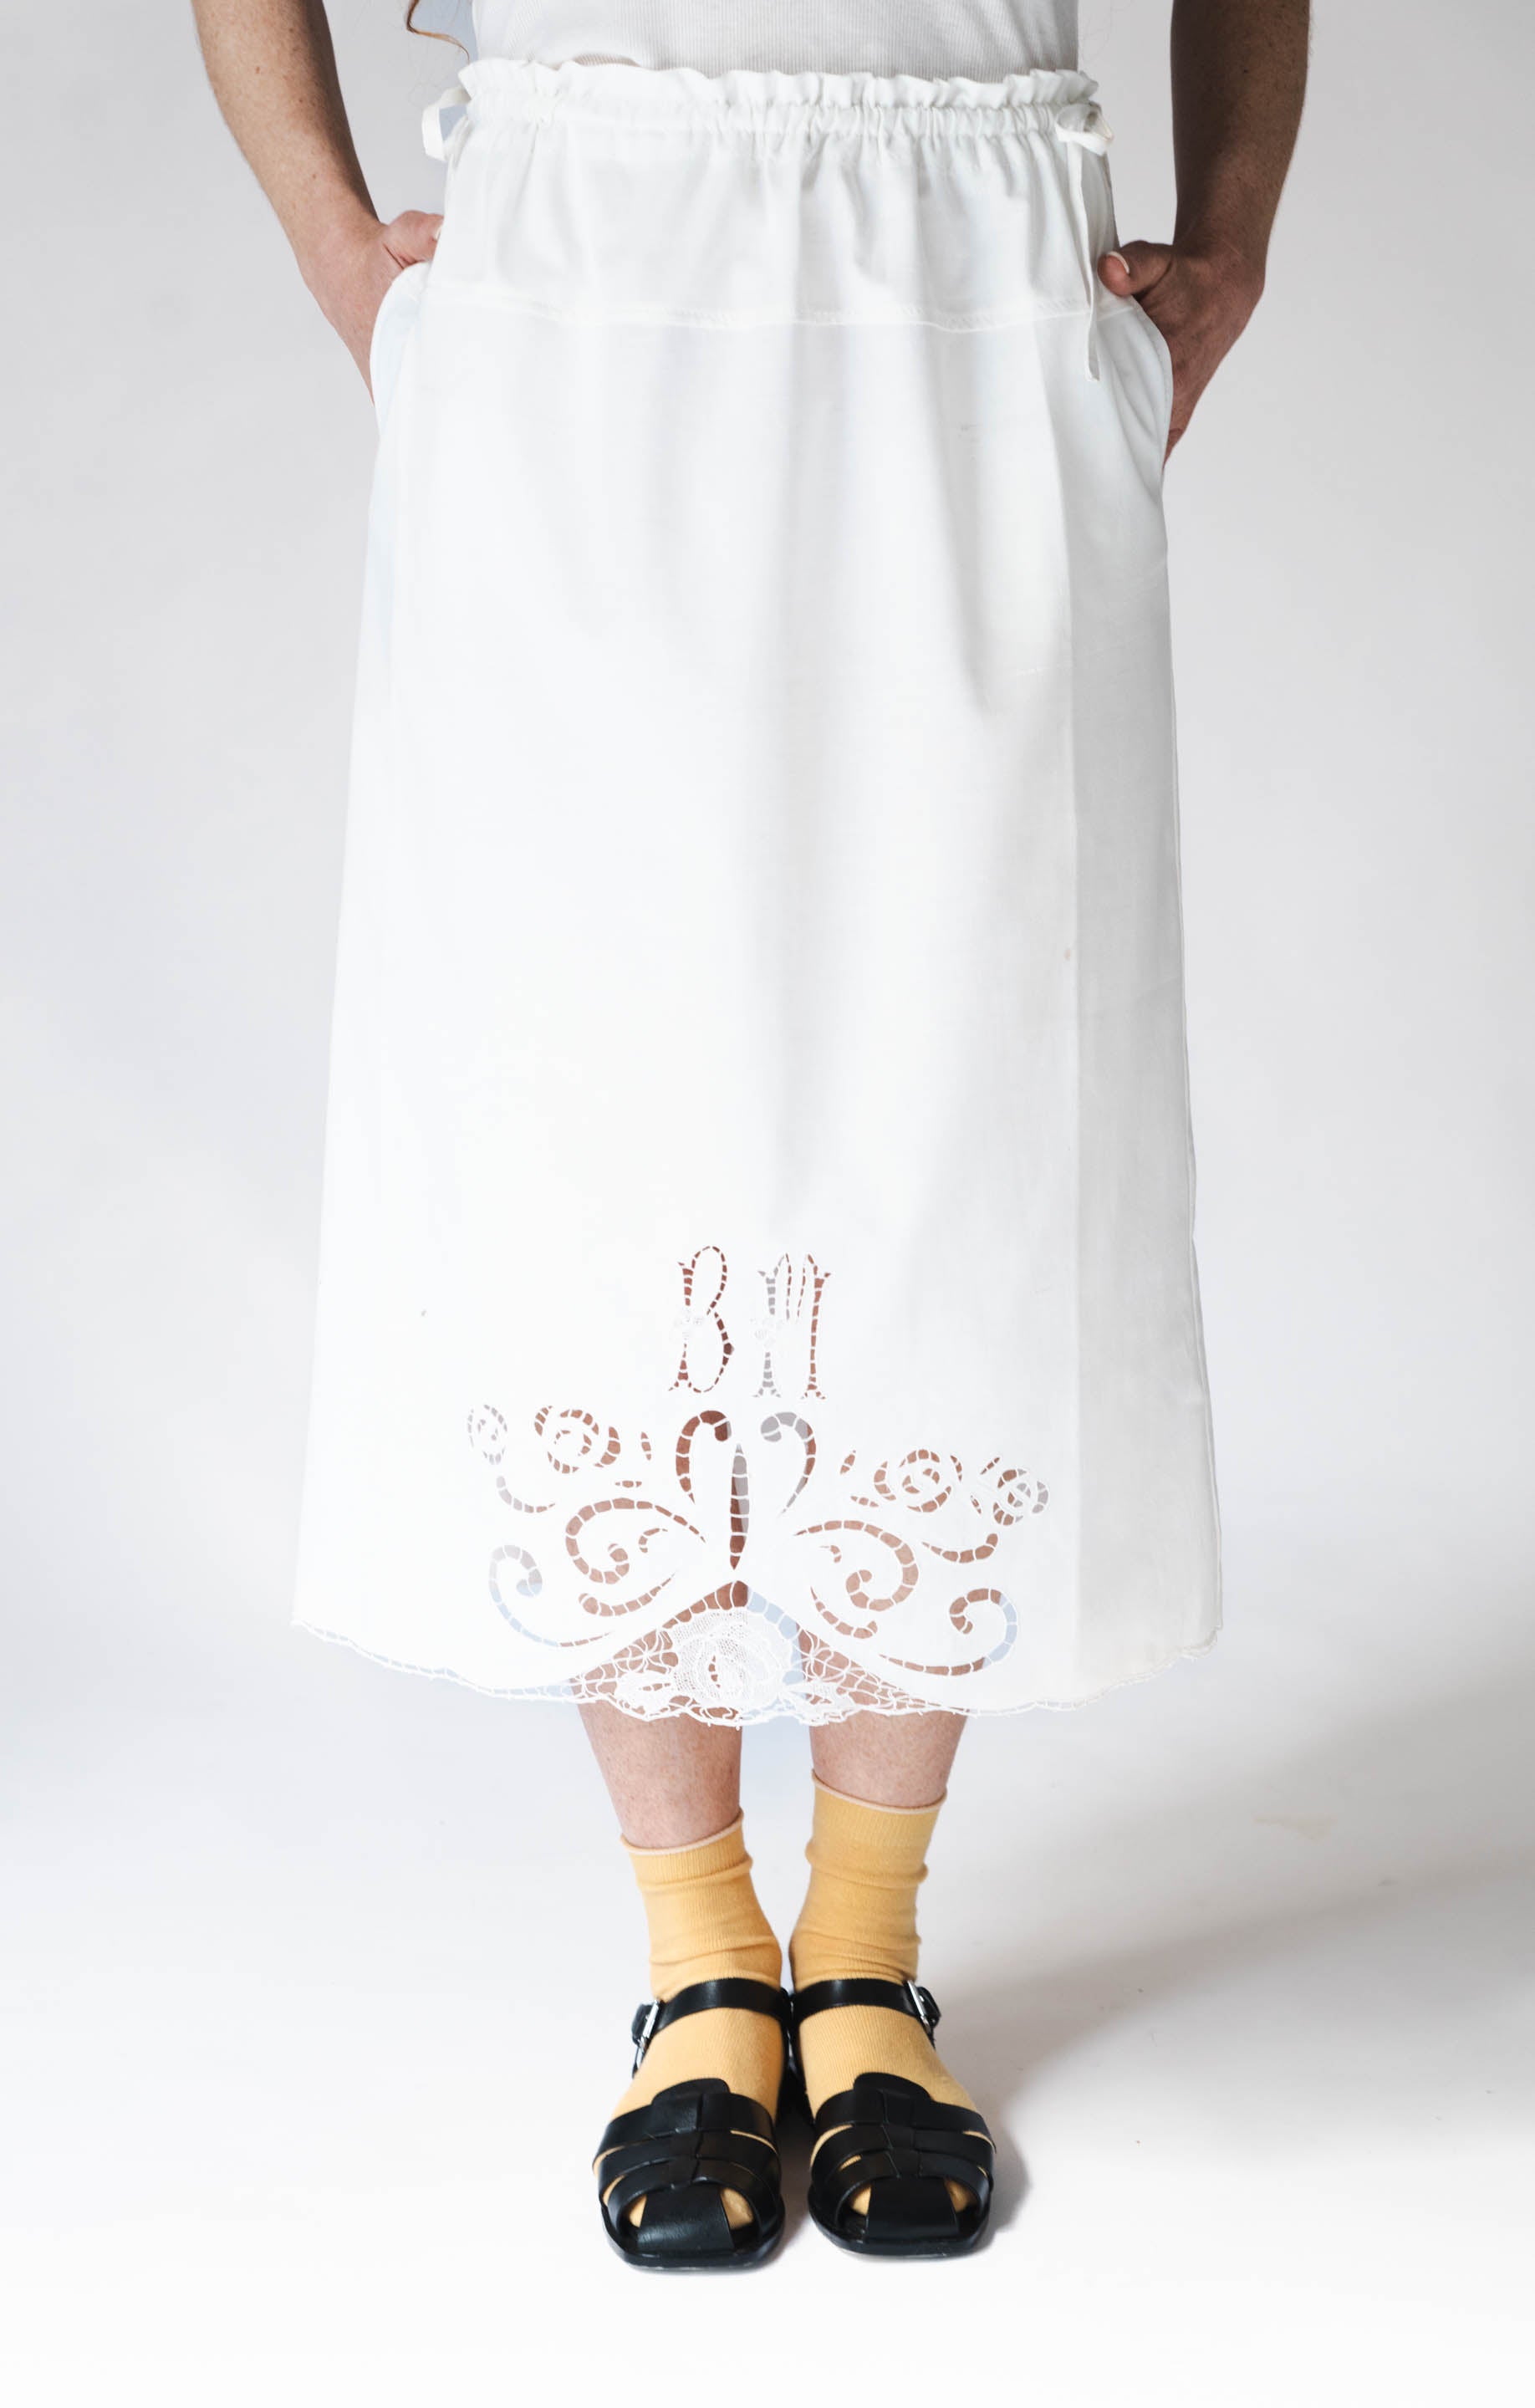 HAND EMBROIDERED PILLOW SKIRT